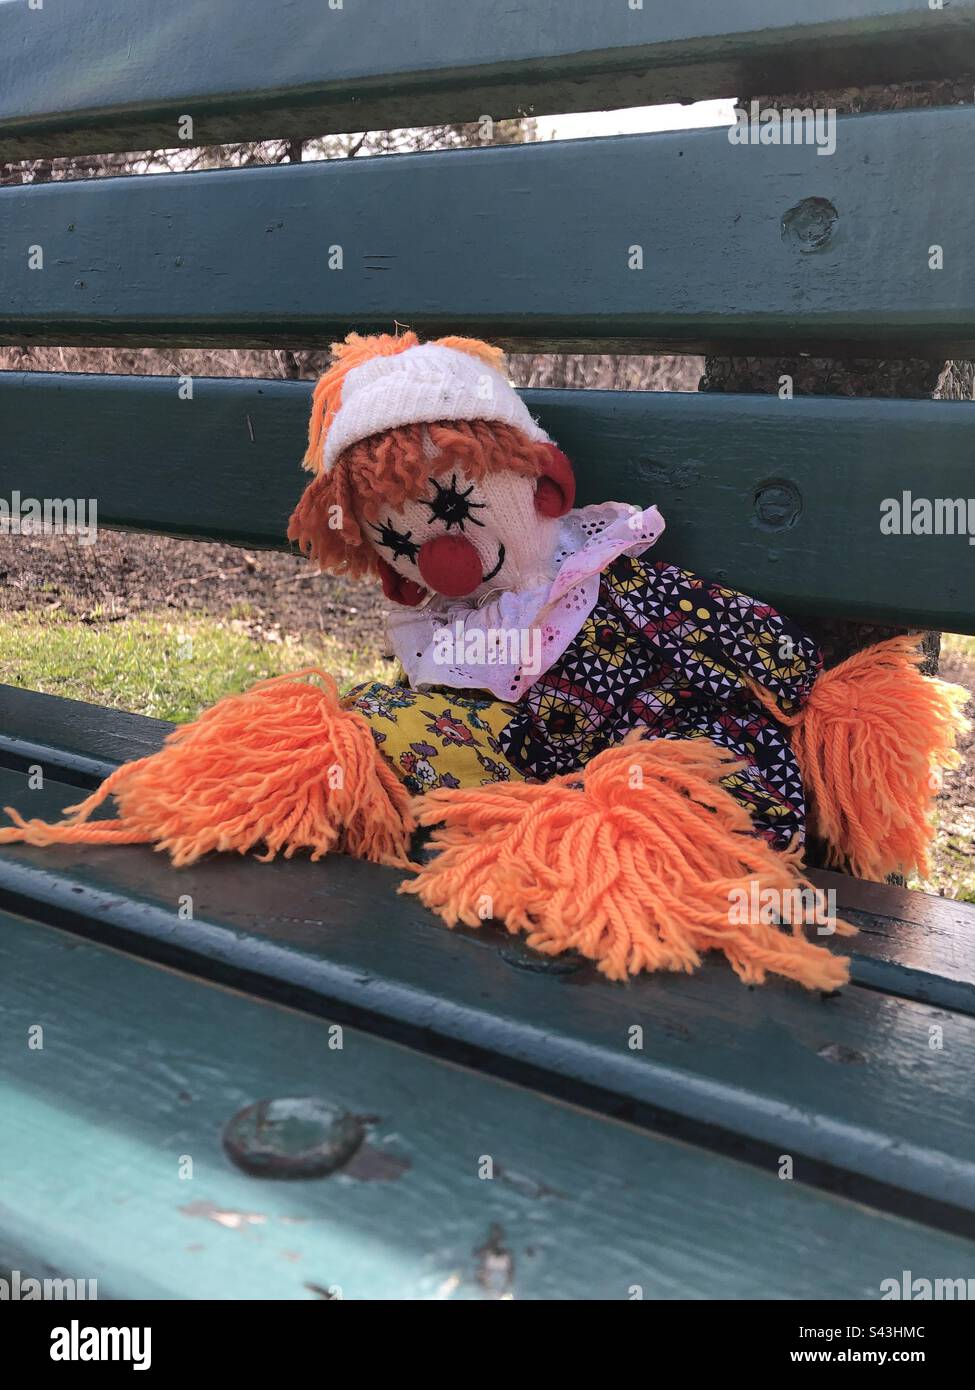 Clown doll sitting on a park bench. Stock Photo